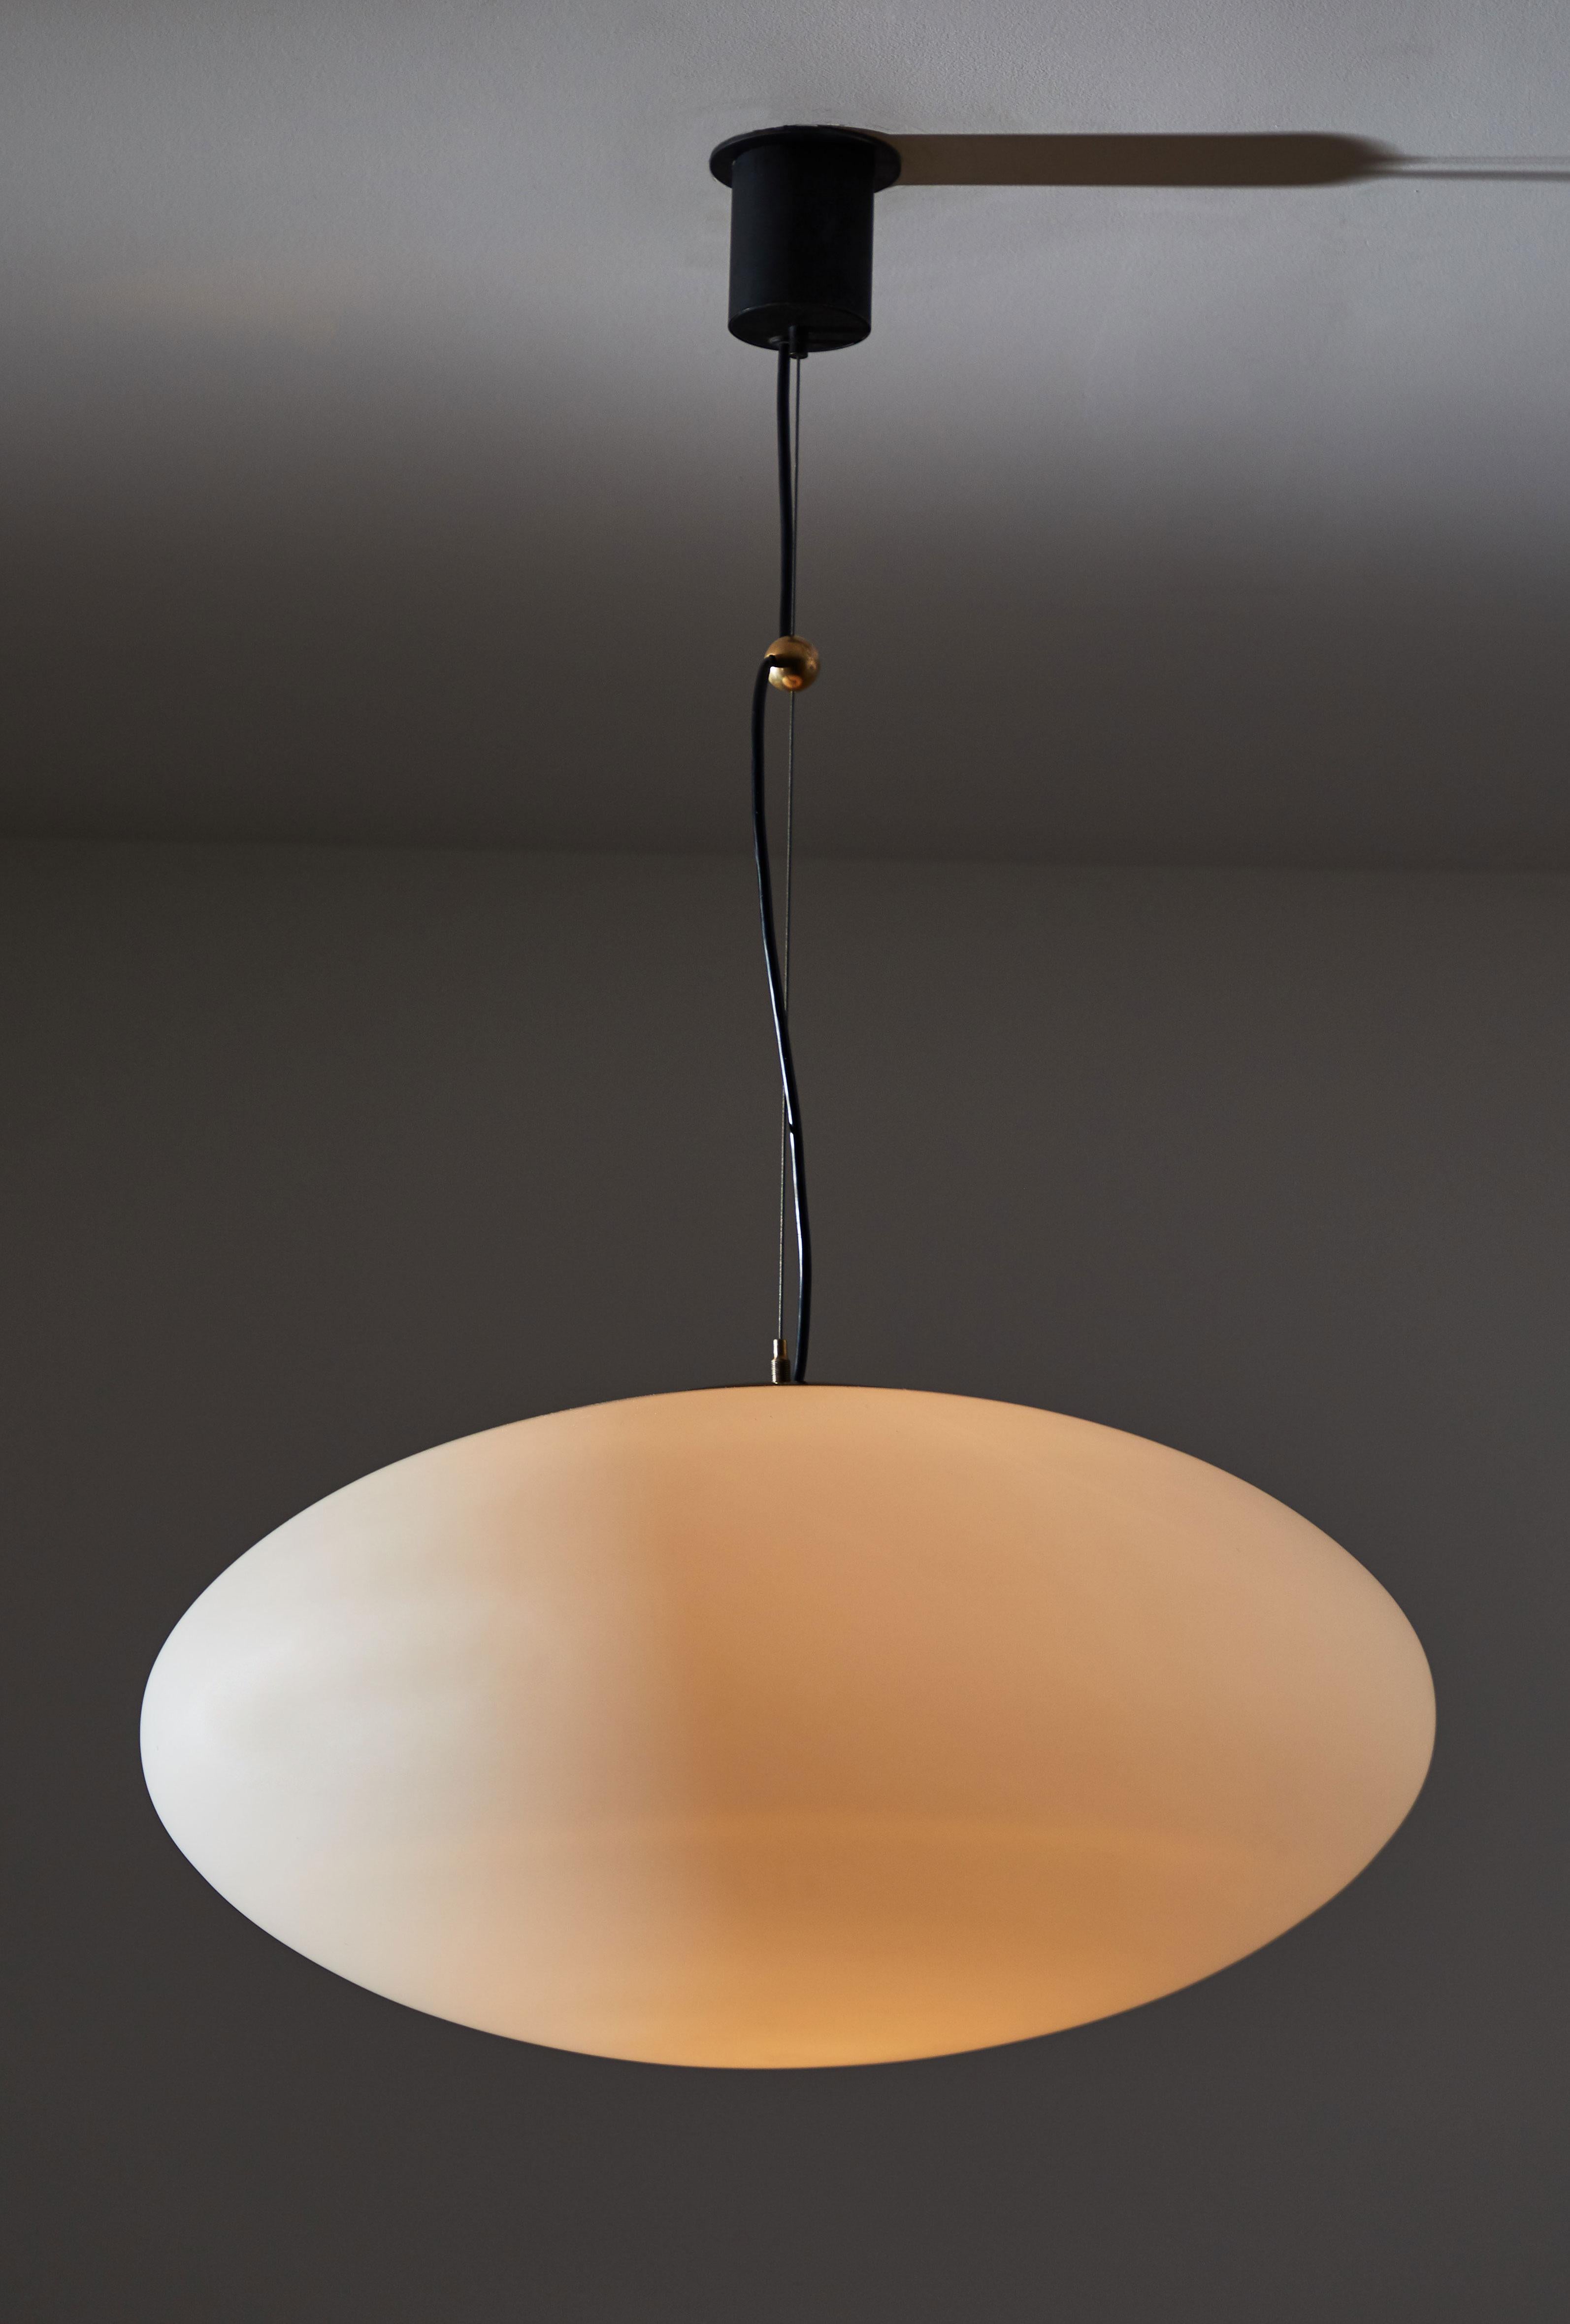 Rare large sized suspension light by Stilnovo. Manufactured in Italy, circa 1950s. Brushed satin glass diffuser, brass hardware, original enameled metal canopy, custom brass ceiling plate. Rewired for US junction boxes. Takes one E27 100w maximum